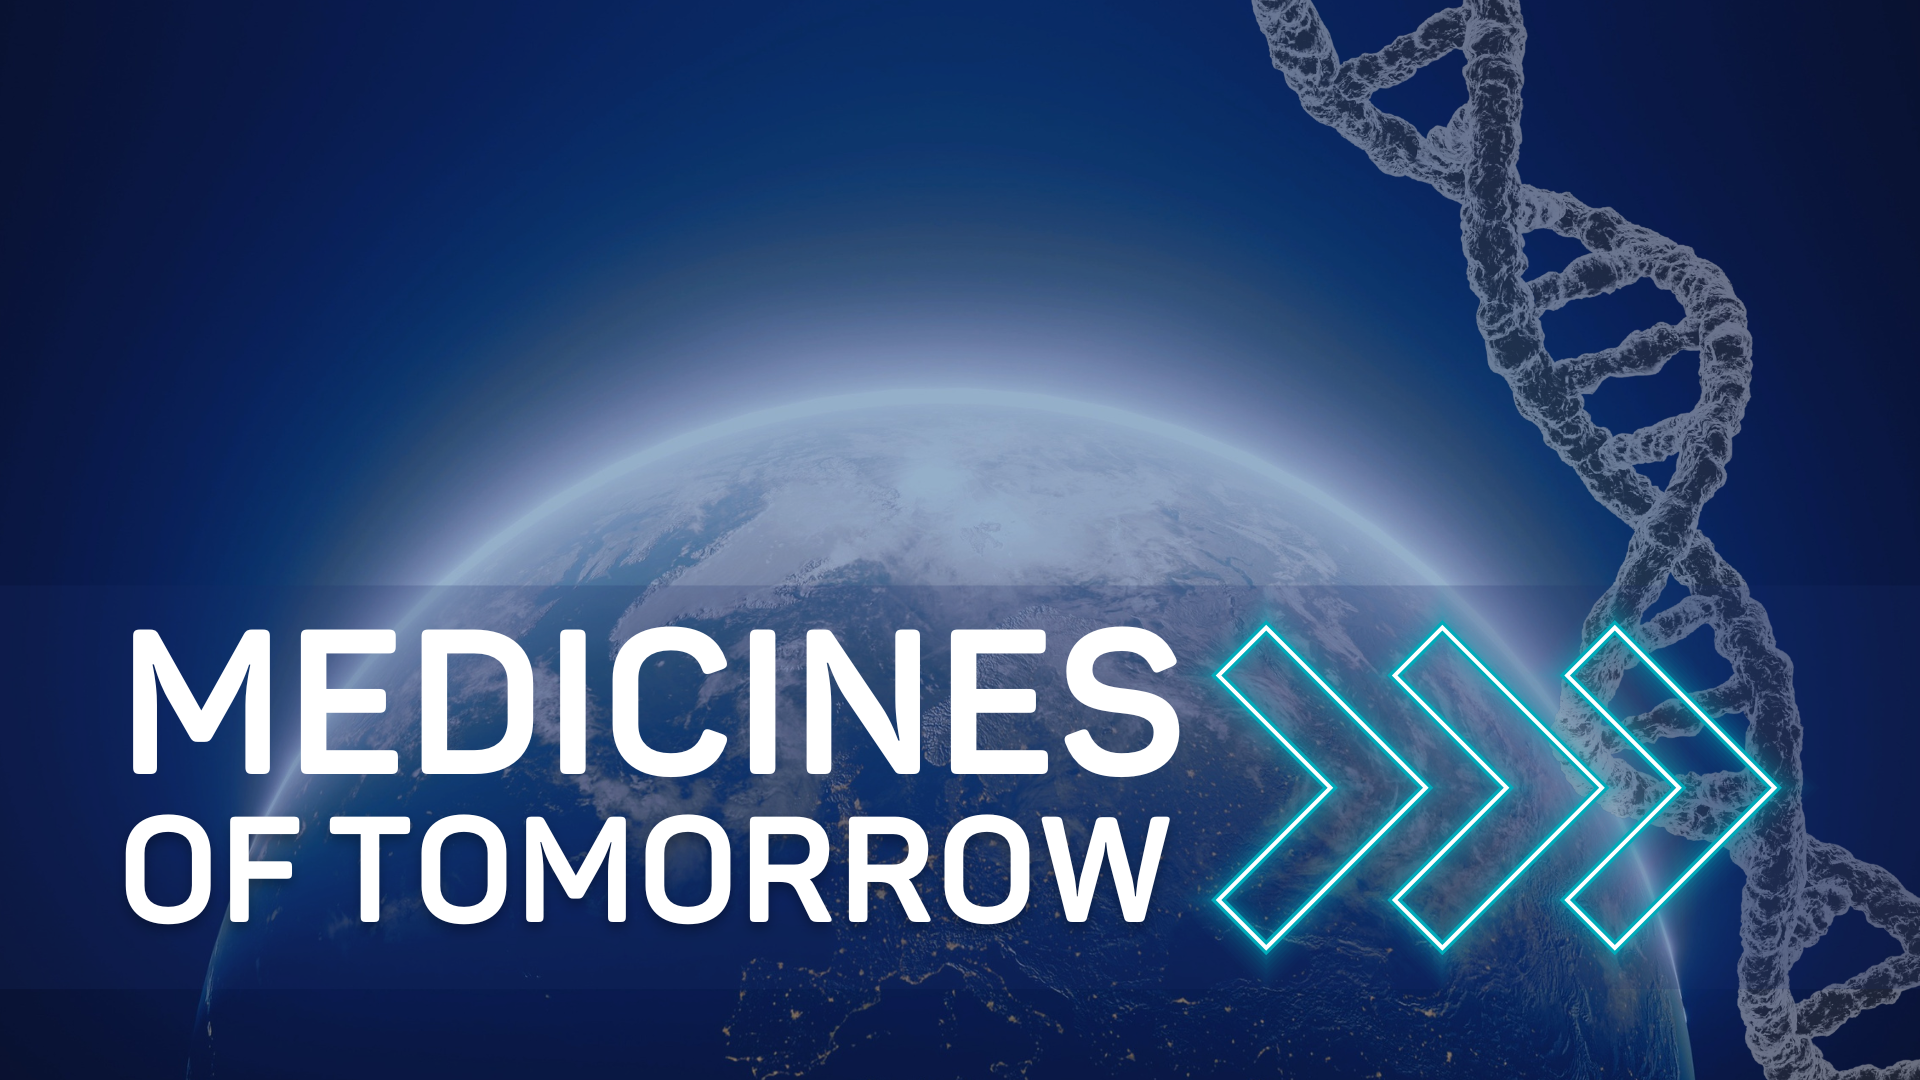 New Horizons event, to explore the exciting medicines of tomorrow